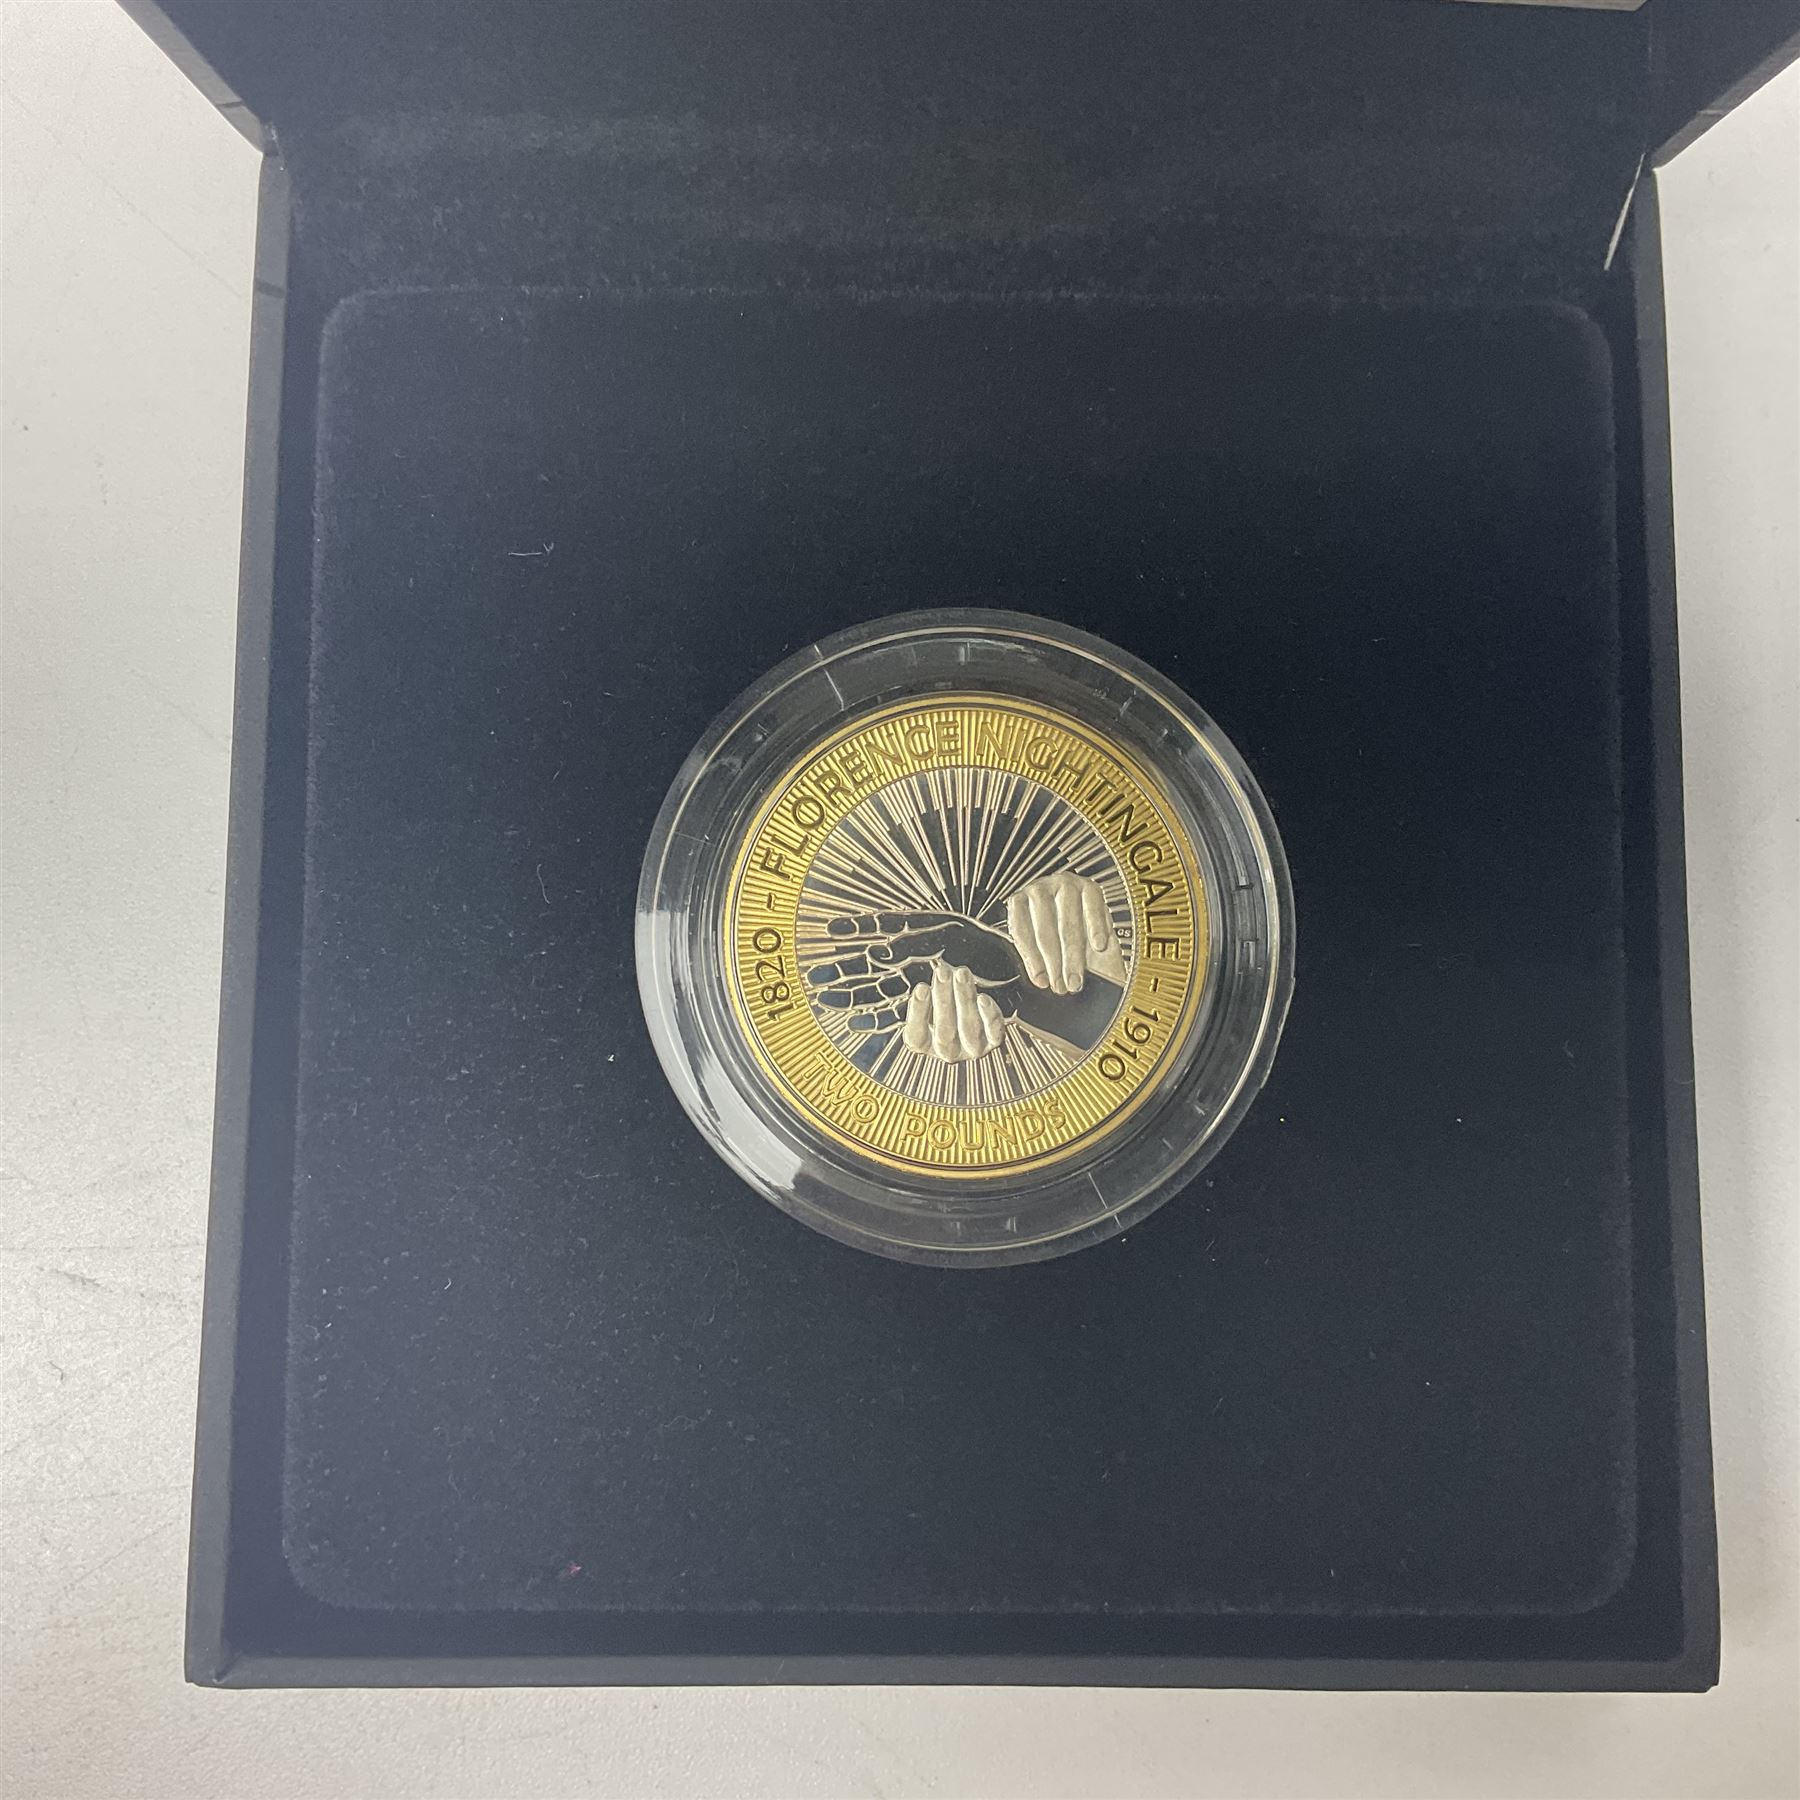 The Royal Mint United Kingdom 2010 ''Florence Nightingale' silver proof piedfort two pound coin - Image 3 of 7